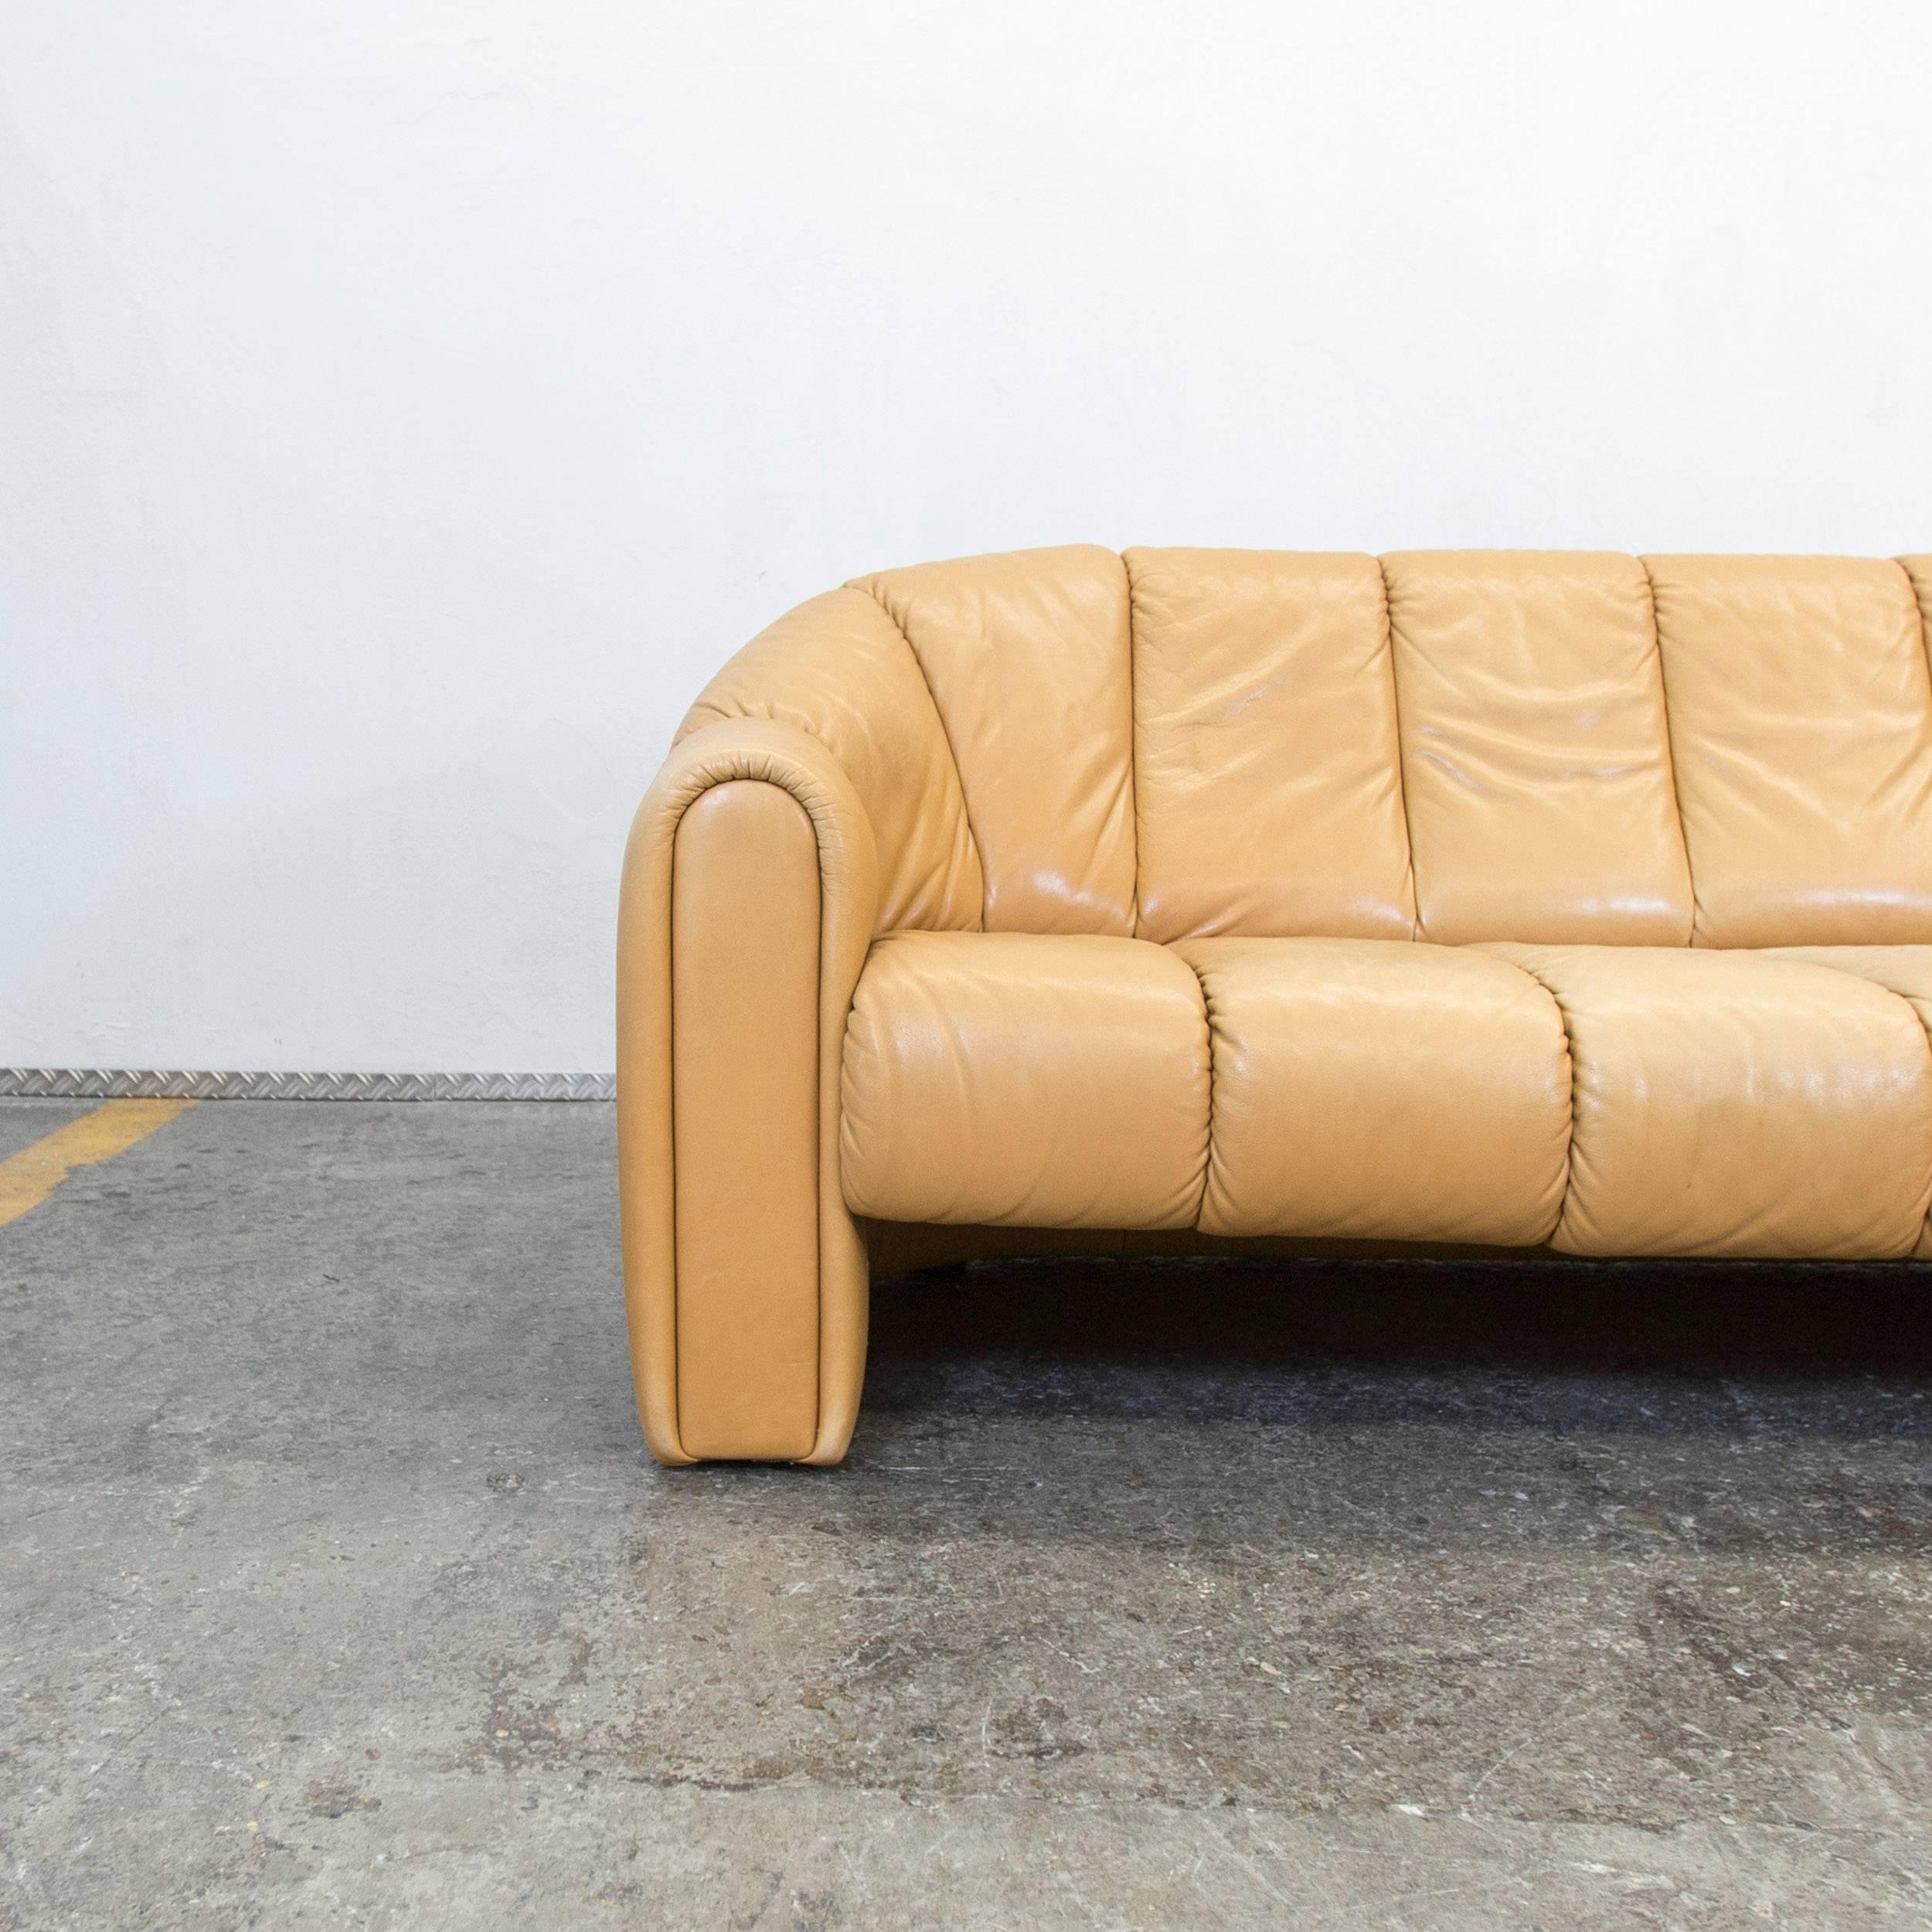 Brown colored original COR designer leather sofa in a vintage style, designed for pure comfort.